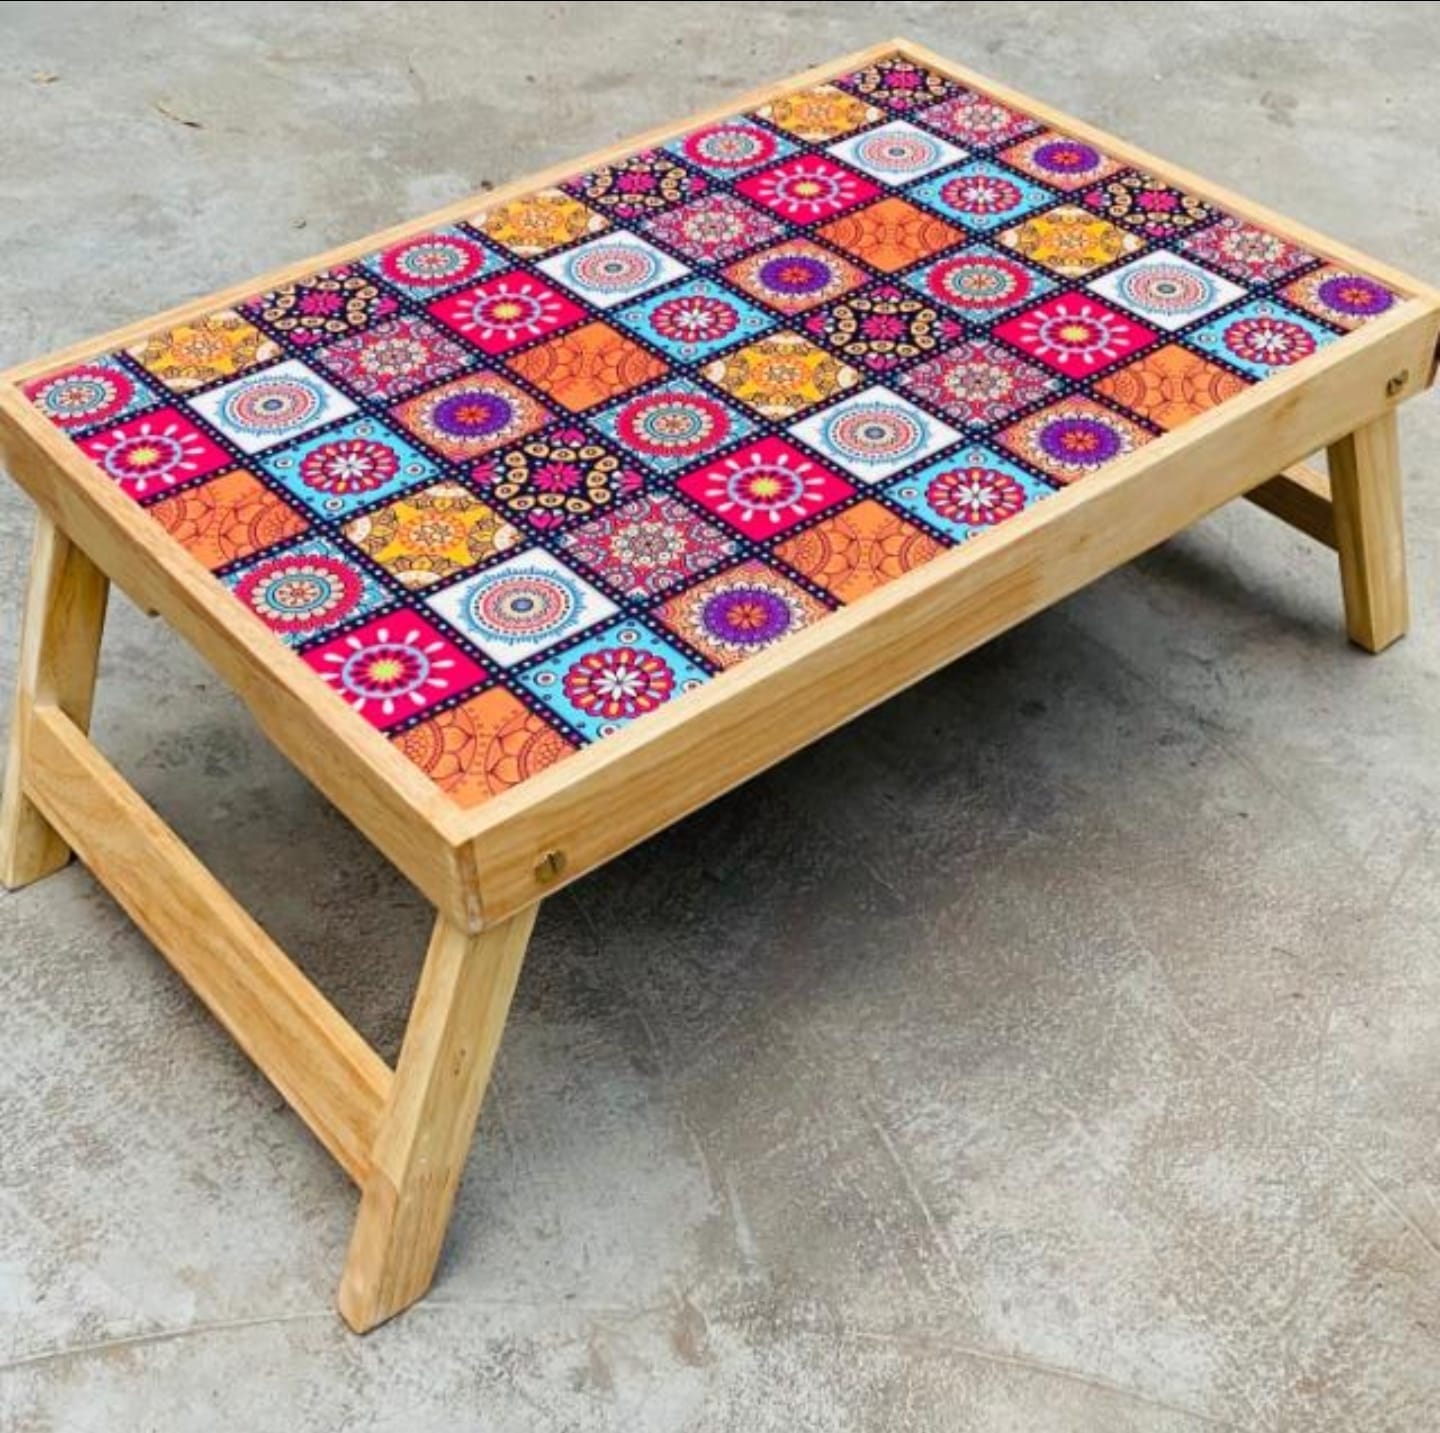 Designer Tray Cum Table | Wooden Bed Table | Wooden Study Table